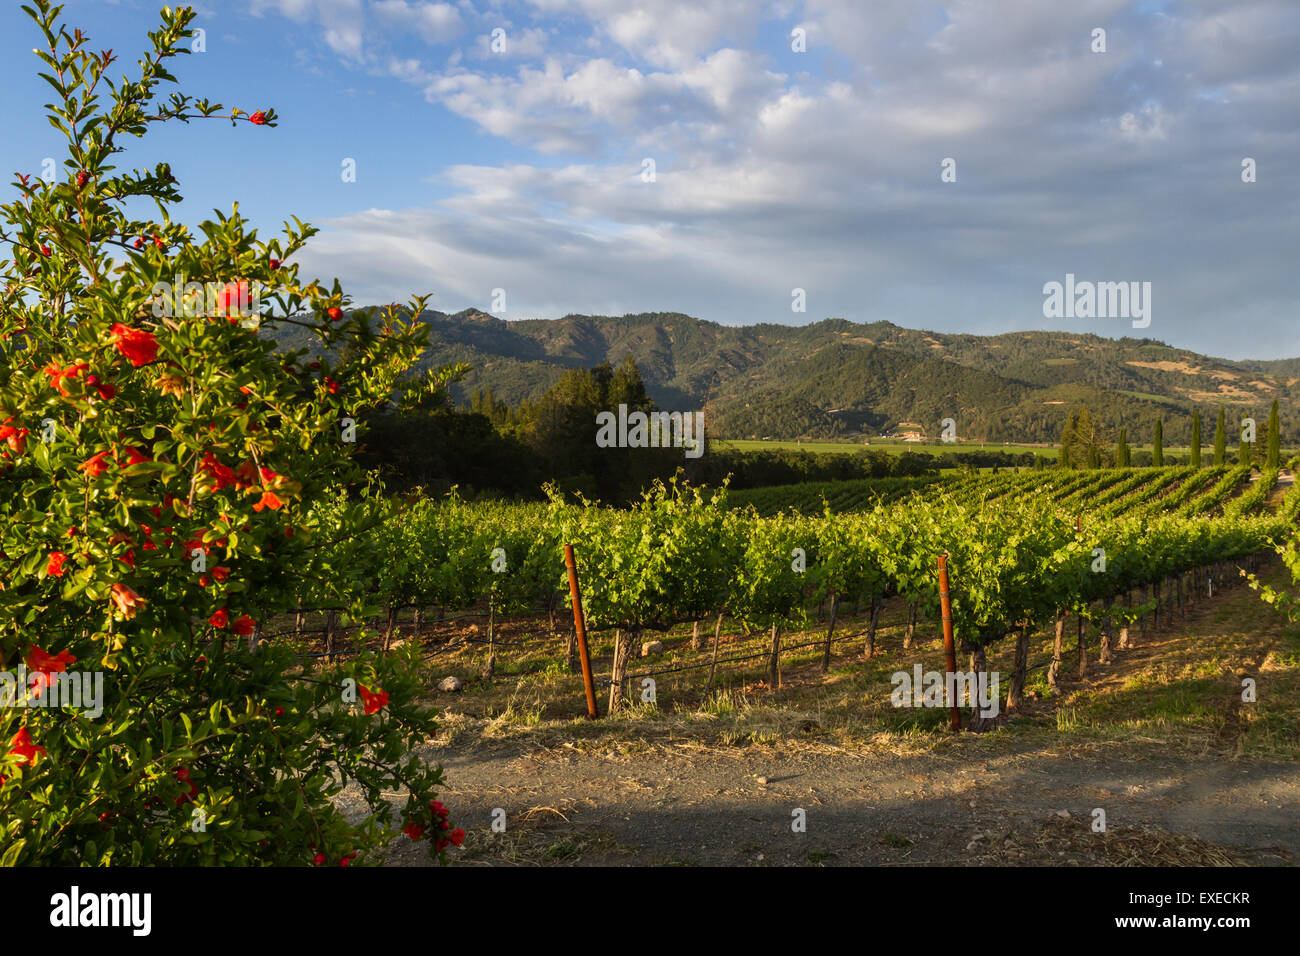 Napa valley landscape, with rows of healthy green grape vines Stock Photo